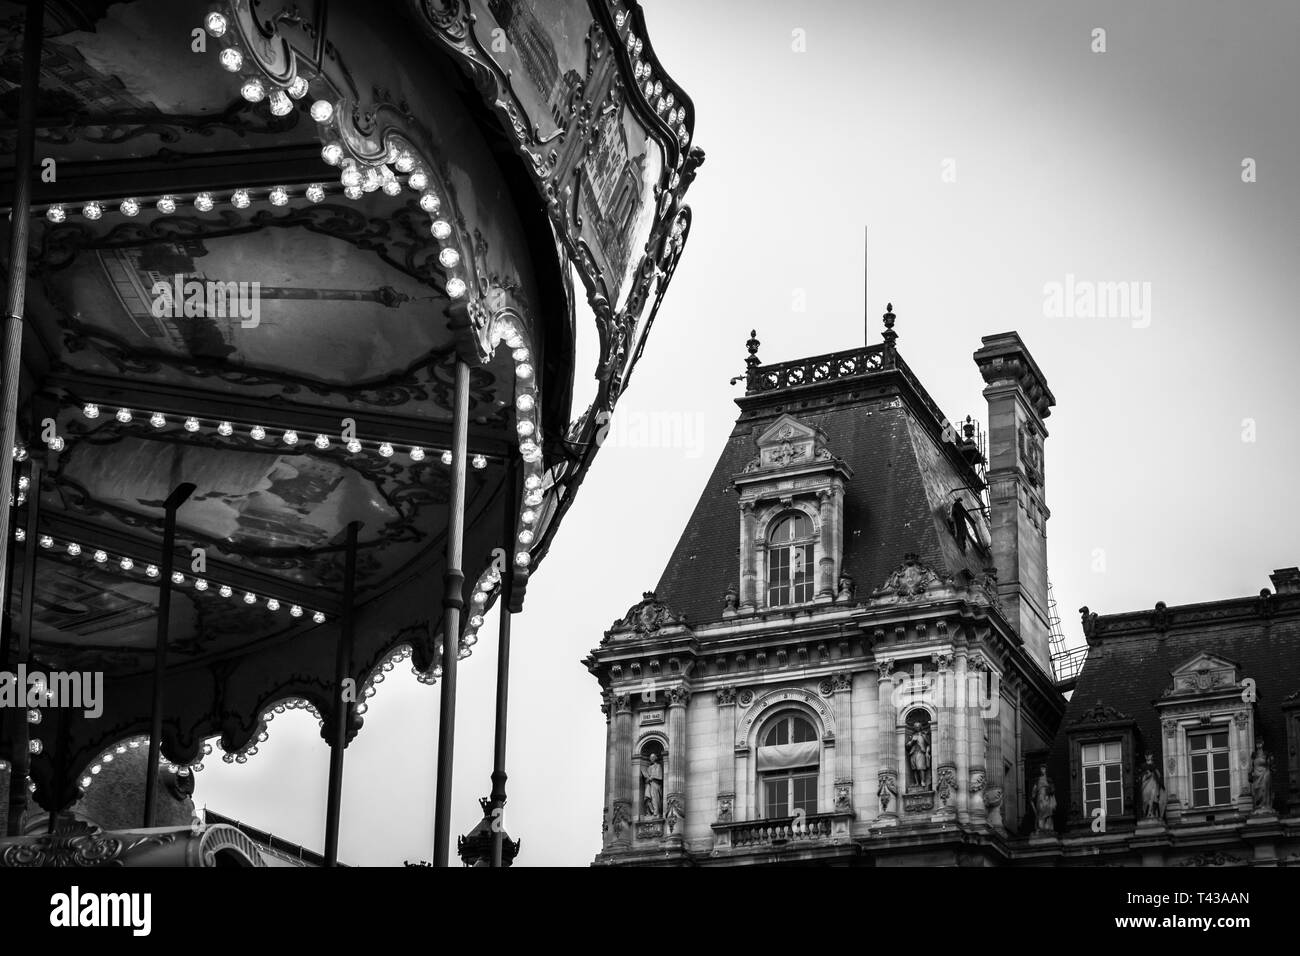 Landscape of the Hotel de Ville of Paris and the Carousel Stock Photo